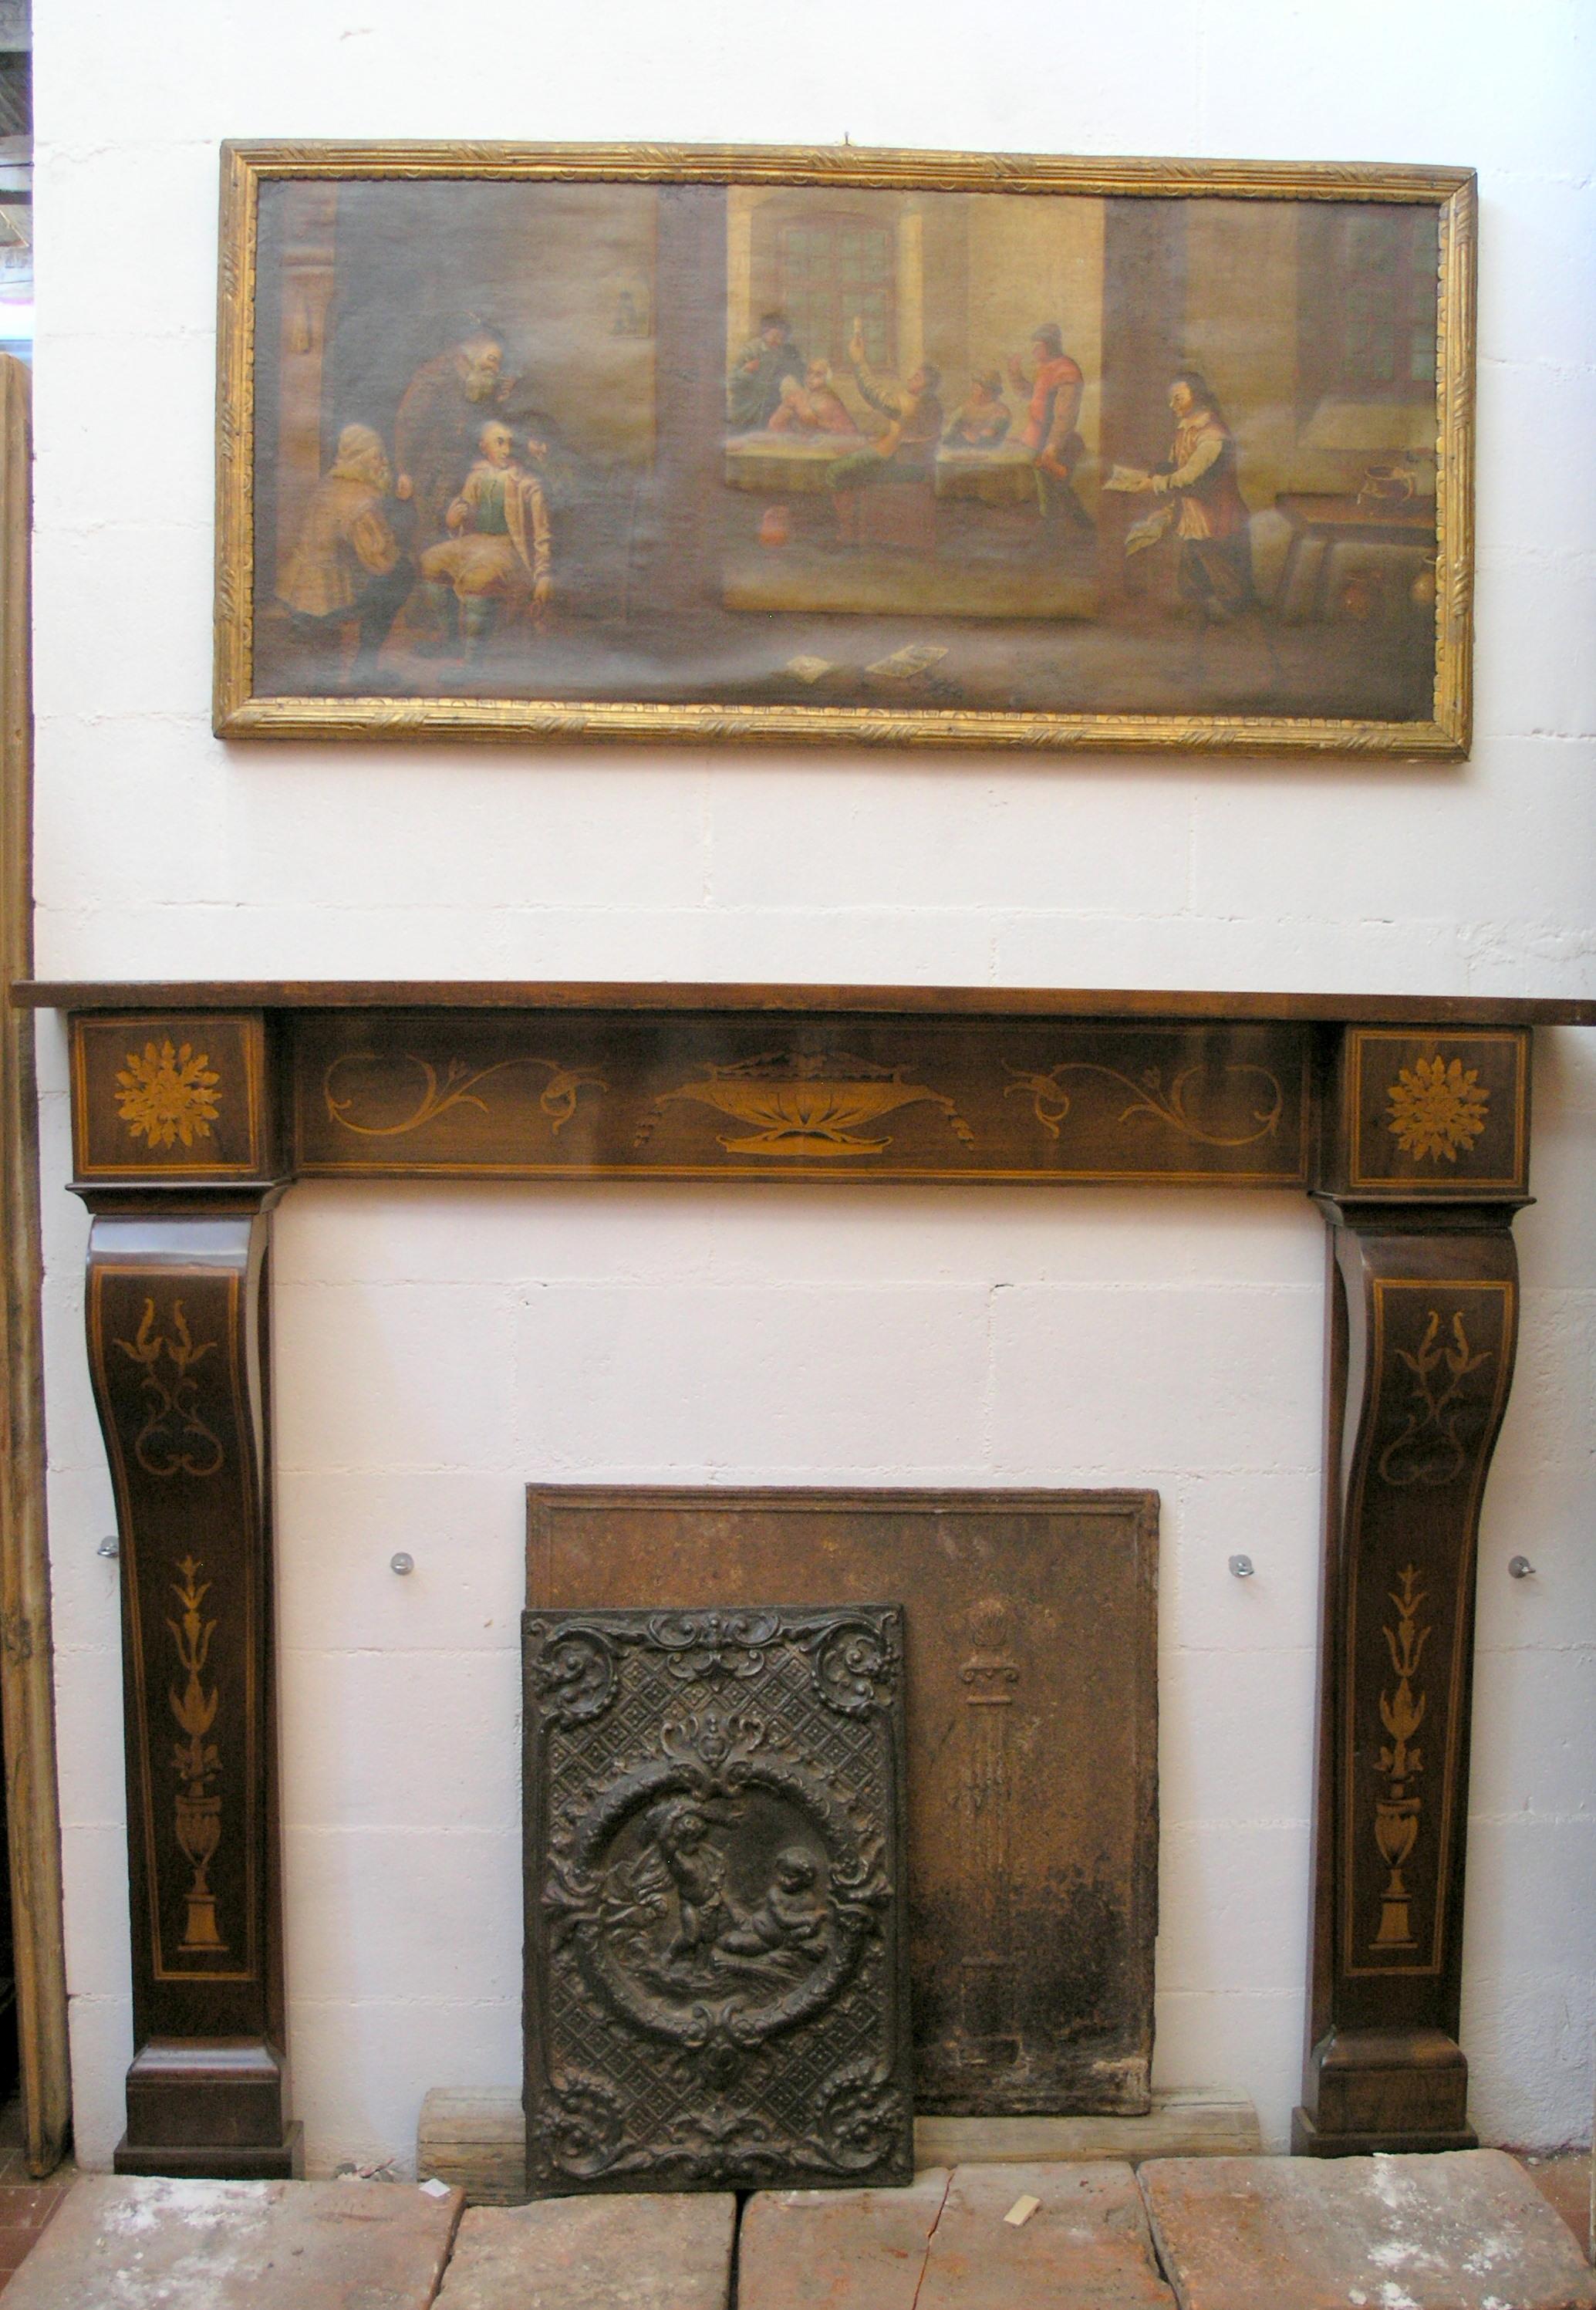 Antique Inlaided Walnut Wood Fireplace Mantel 19th c.